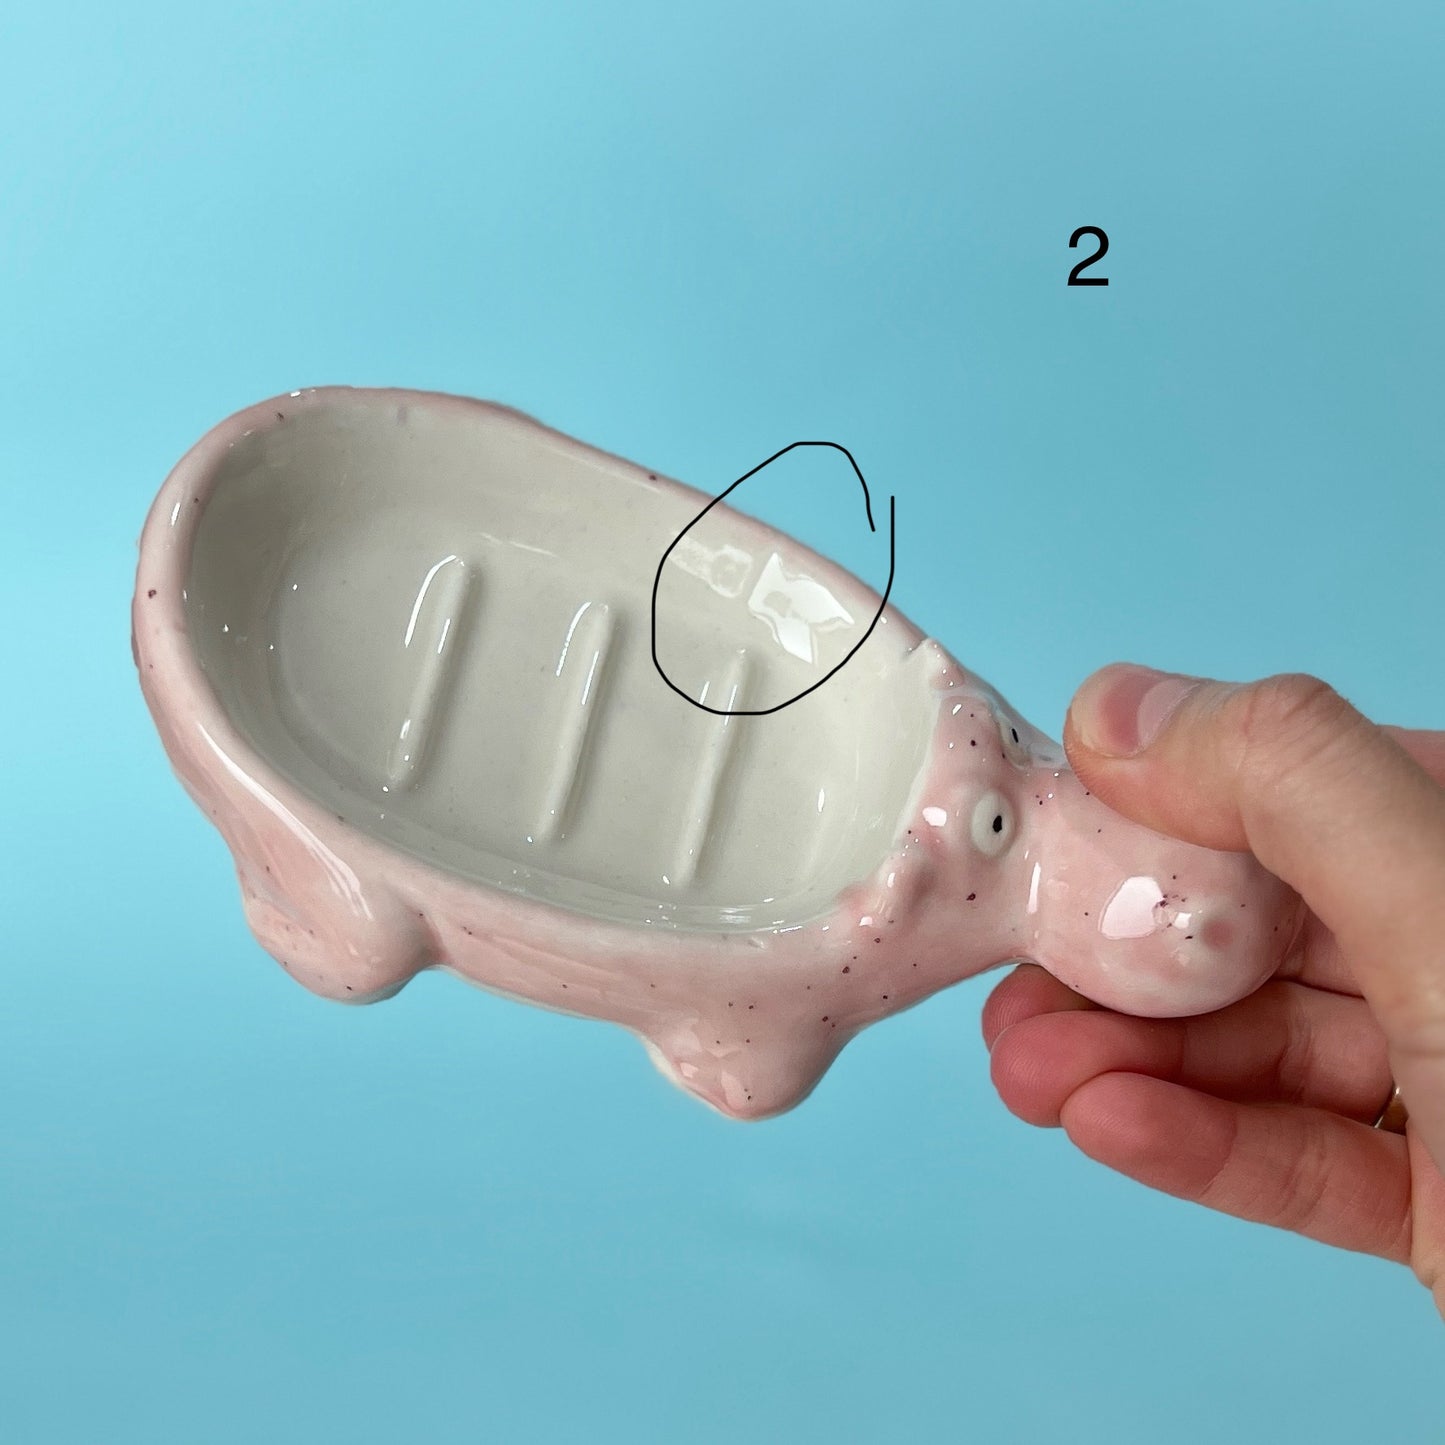 Pink Hippo Soap Dish (seconds)